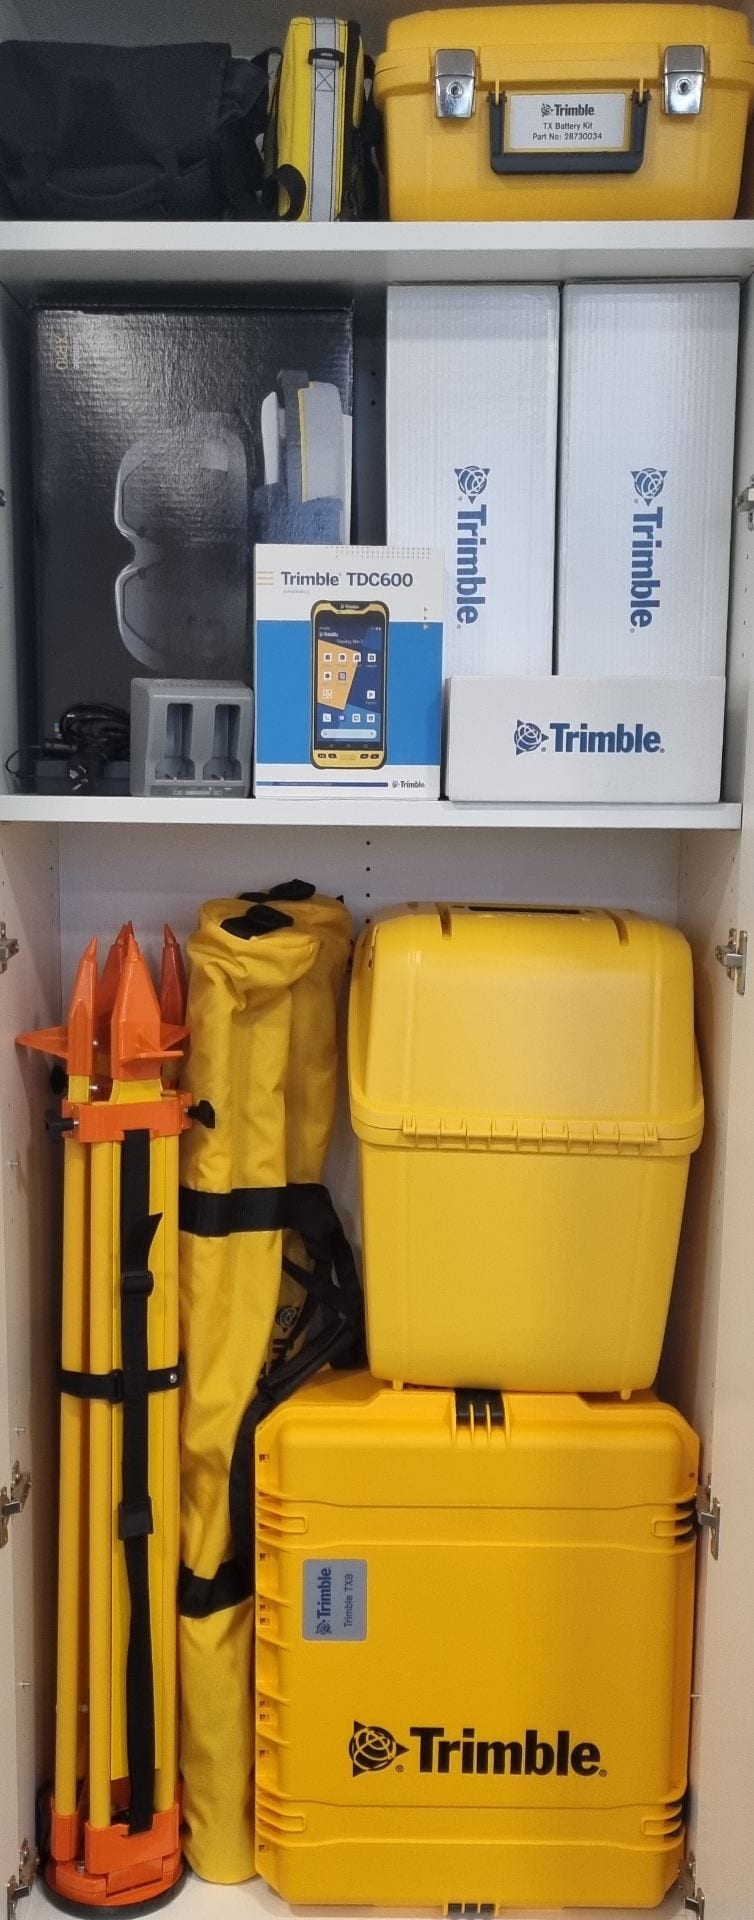 A picture of the Trimble Hardware stacked in a large cupboard.